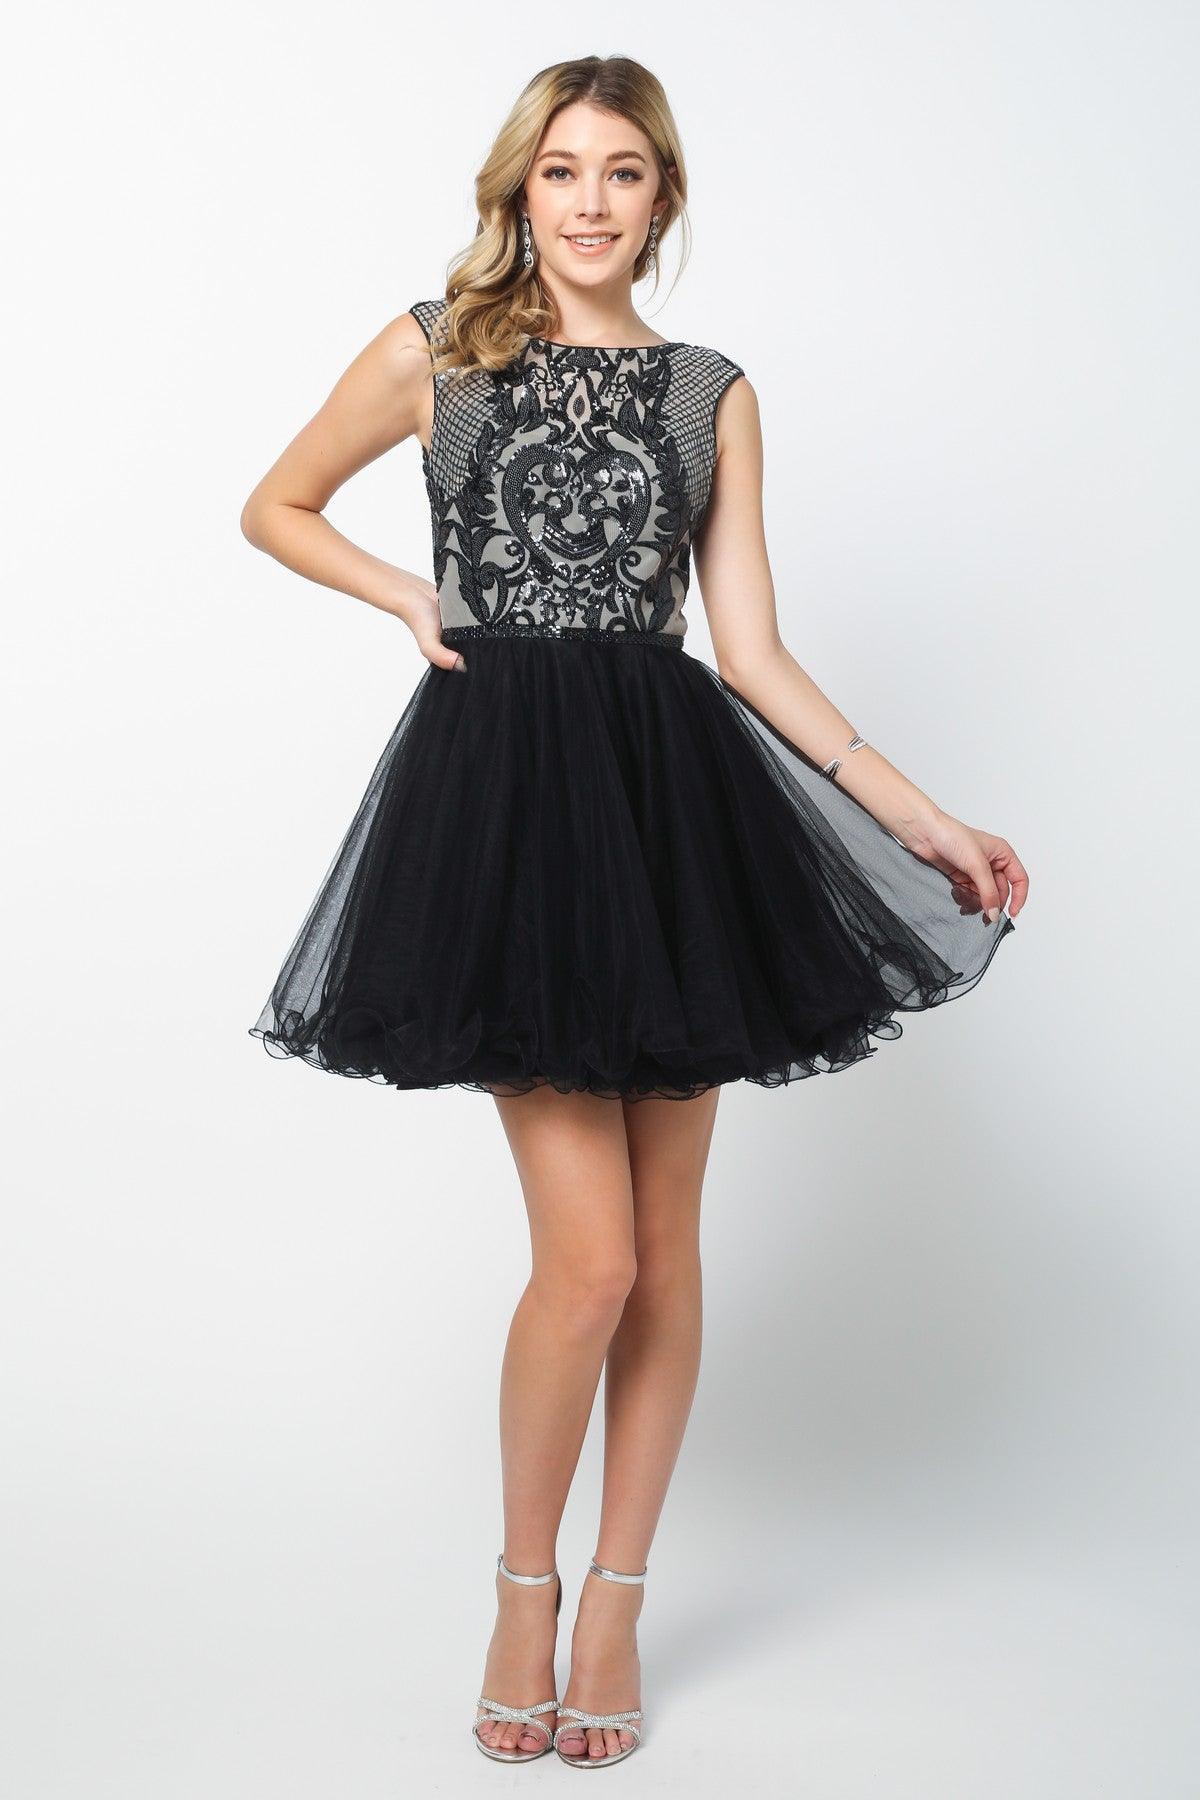 Black Prom Short Dress Homecoming for $69.99 – The Dress Outlet